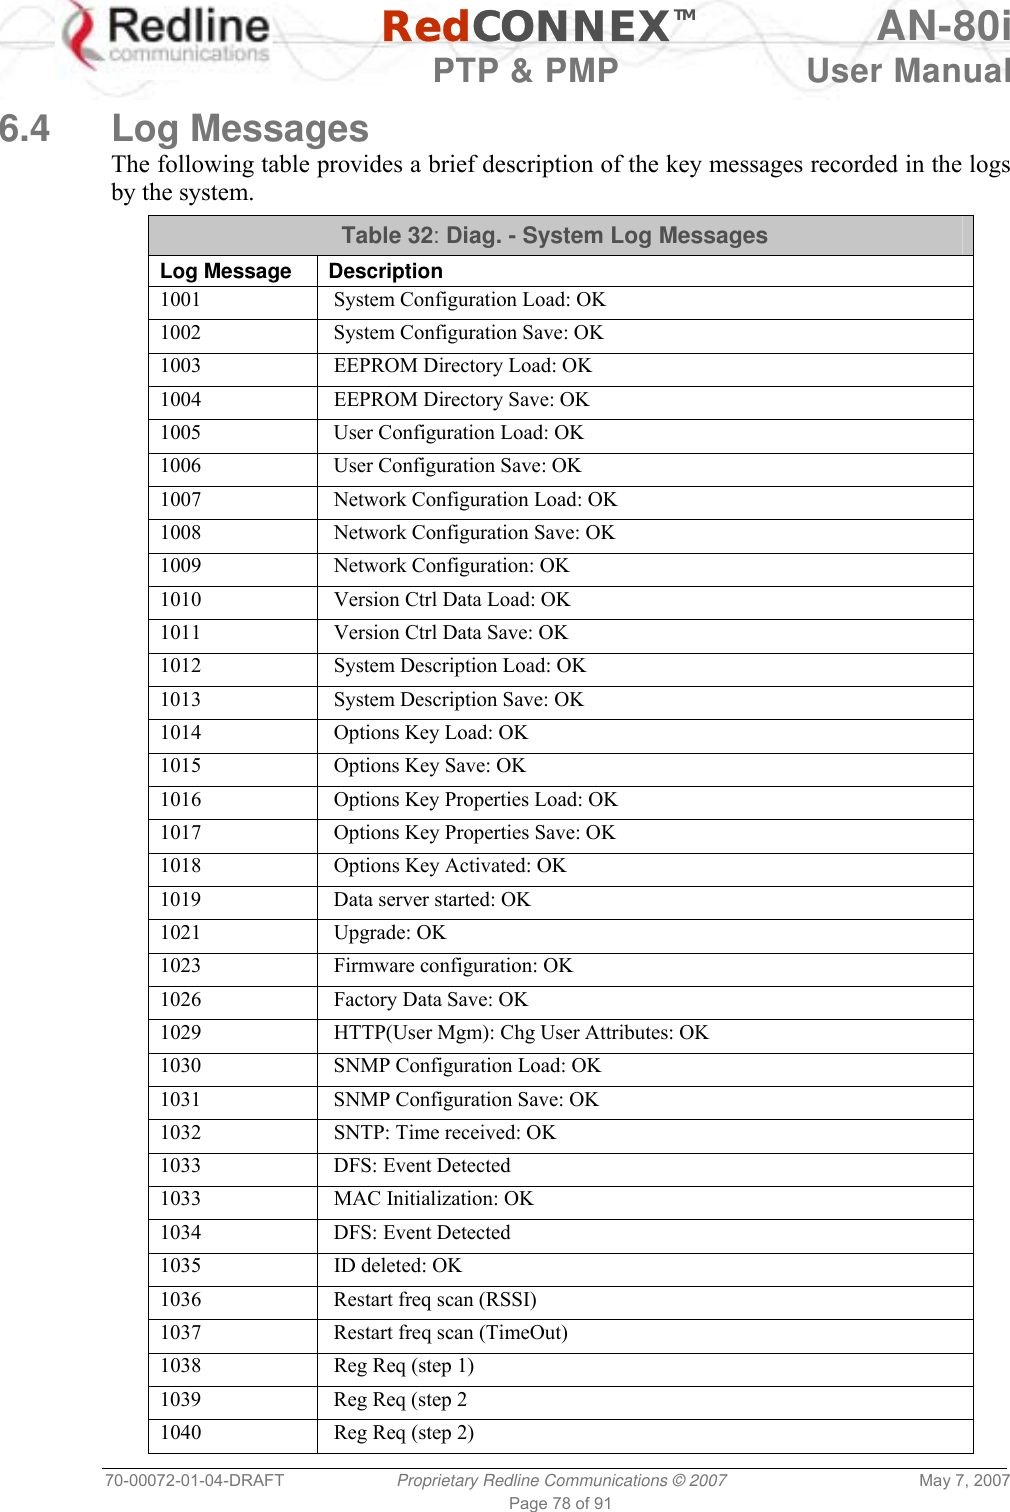   RedCONNEXTM AN-80i   PTP &amp; PMP  User Manual 70-00072-01-04-DRAFT  Proprietary Redline Communications © 2007  May 7, 2007 Page 78 of 91  6.4 Log Messages The following table provides a brief description of the key messages recorded in the logs by the system. Table 32: Diag. - System Log Messages Log Message  Description 1001    System Configuration Load: OK 1002    System Configuration Save: OK 1003    EEPROM Directory Load: OK 1004    EEPROM Directory Save: OK 1005    User Configuration Load: OK 1006    User Configuration Save: OK 1007    Network Configuration Load: OK 1008    Network Configuration Save: OK 1009    Network Configuration: OK 1010    Version Ctrl Data Load: OK 1011    Version Ctrl Data Save: OK 1012    System Description Load: OK 1013    System Description Save: OK 1014    Options Key Load: OK 1015    Options Key Save: OK 1016    Options Key Properties Load: OK 1017    Options Key Properties Save: OK 1018    Options Key Activated: OK 1019    Data server started: OK 1021    Upgrade: OK 1023    Firmware configuration: OK 1026    Factory Data Save: OK 1029    HTTP(User Mgm): Chg User Attributes: OK 1030    SNMP Configuration Load: OK 1031    SNMP Configuration Save: OK 1032    SNTP: Time received: OK 1033    DFS: Event Detected 1033    MAC Initialization: OK 1034    DFS: Event Detected 1035    ID deleted: OK 1036    Restart freq scan (RSSI) 1037    Restart freq scan (TimeOut) 1038    Reg Req (step 1) 1039    Reg Req (step 2  1040    Reg Req (step 2) 